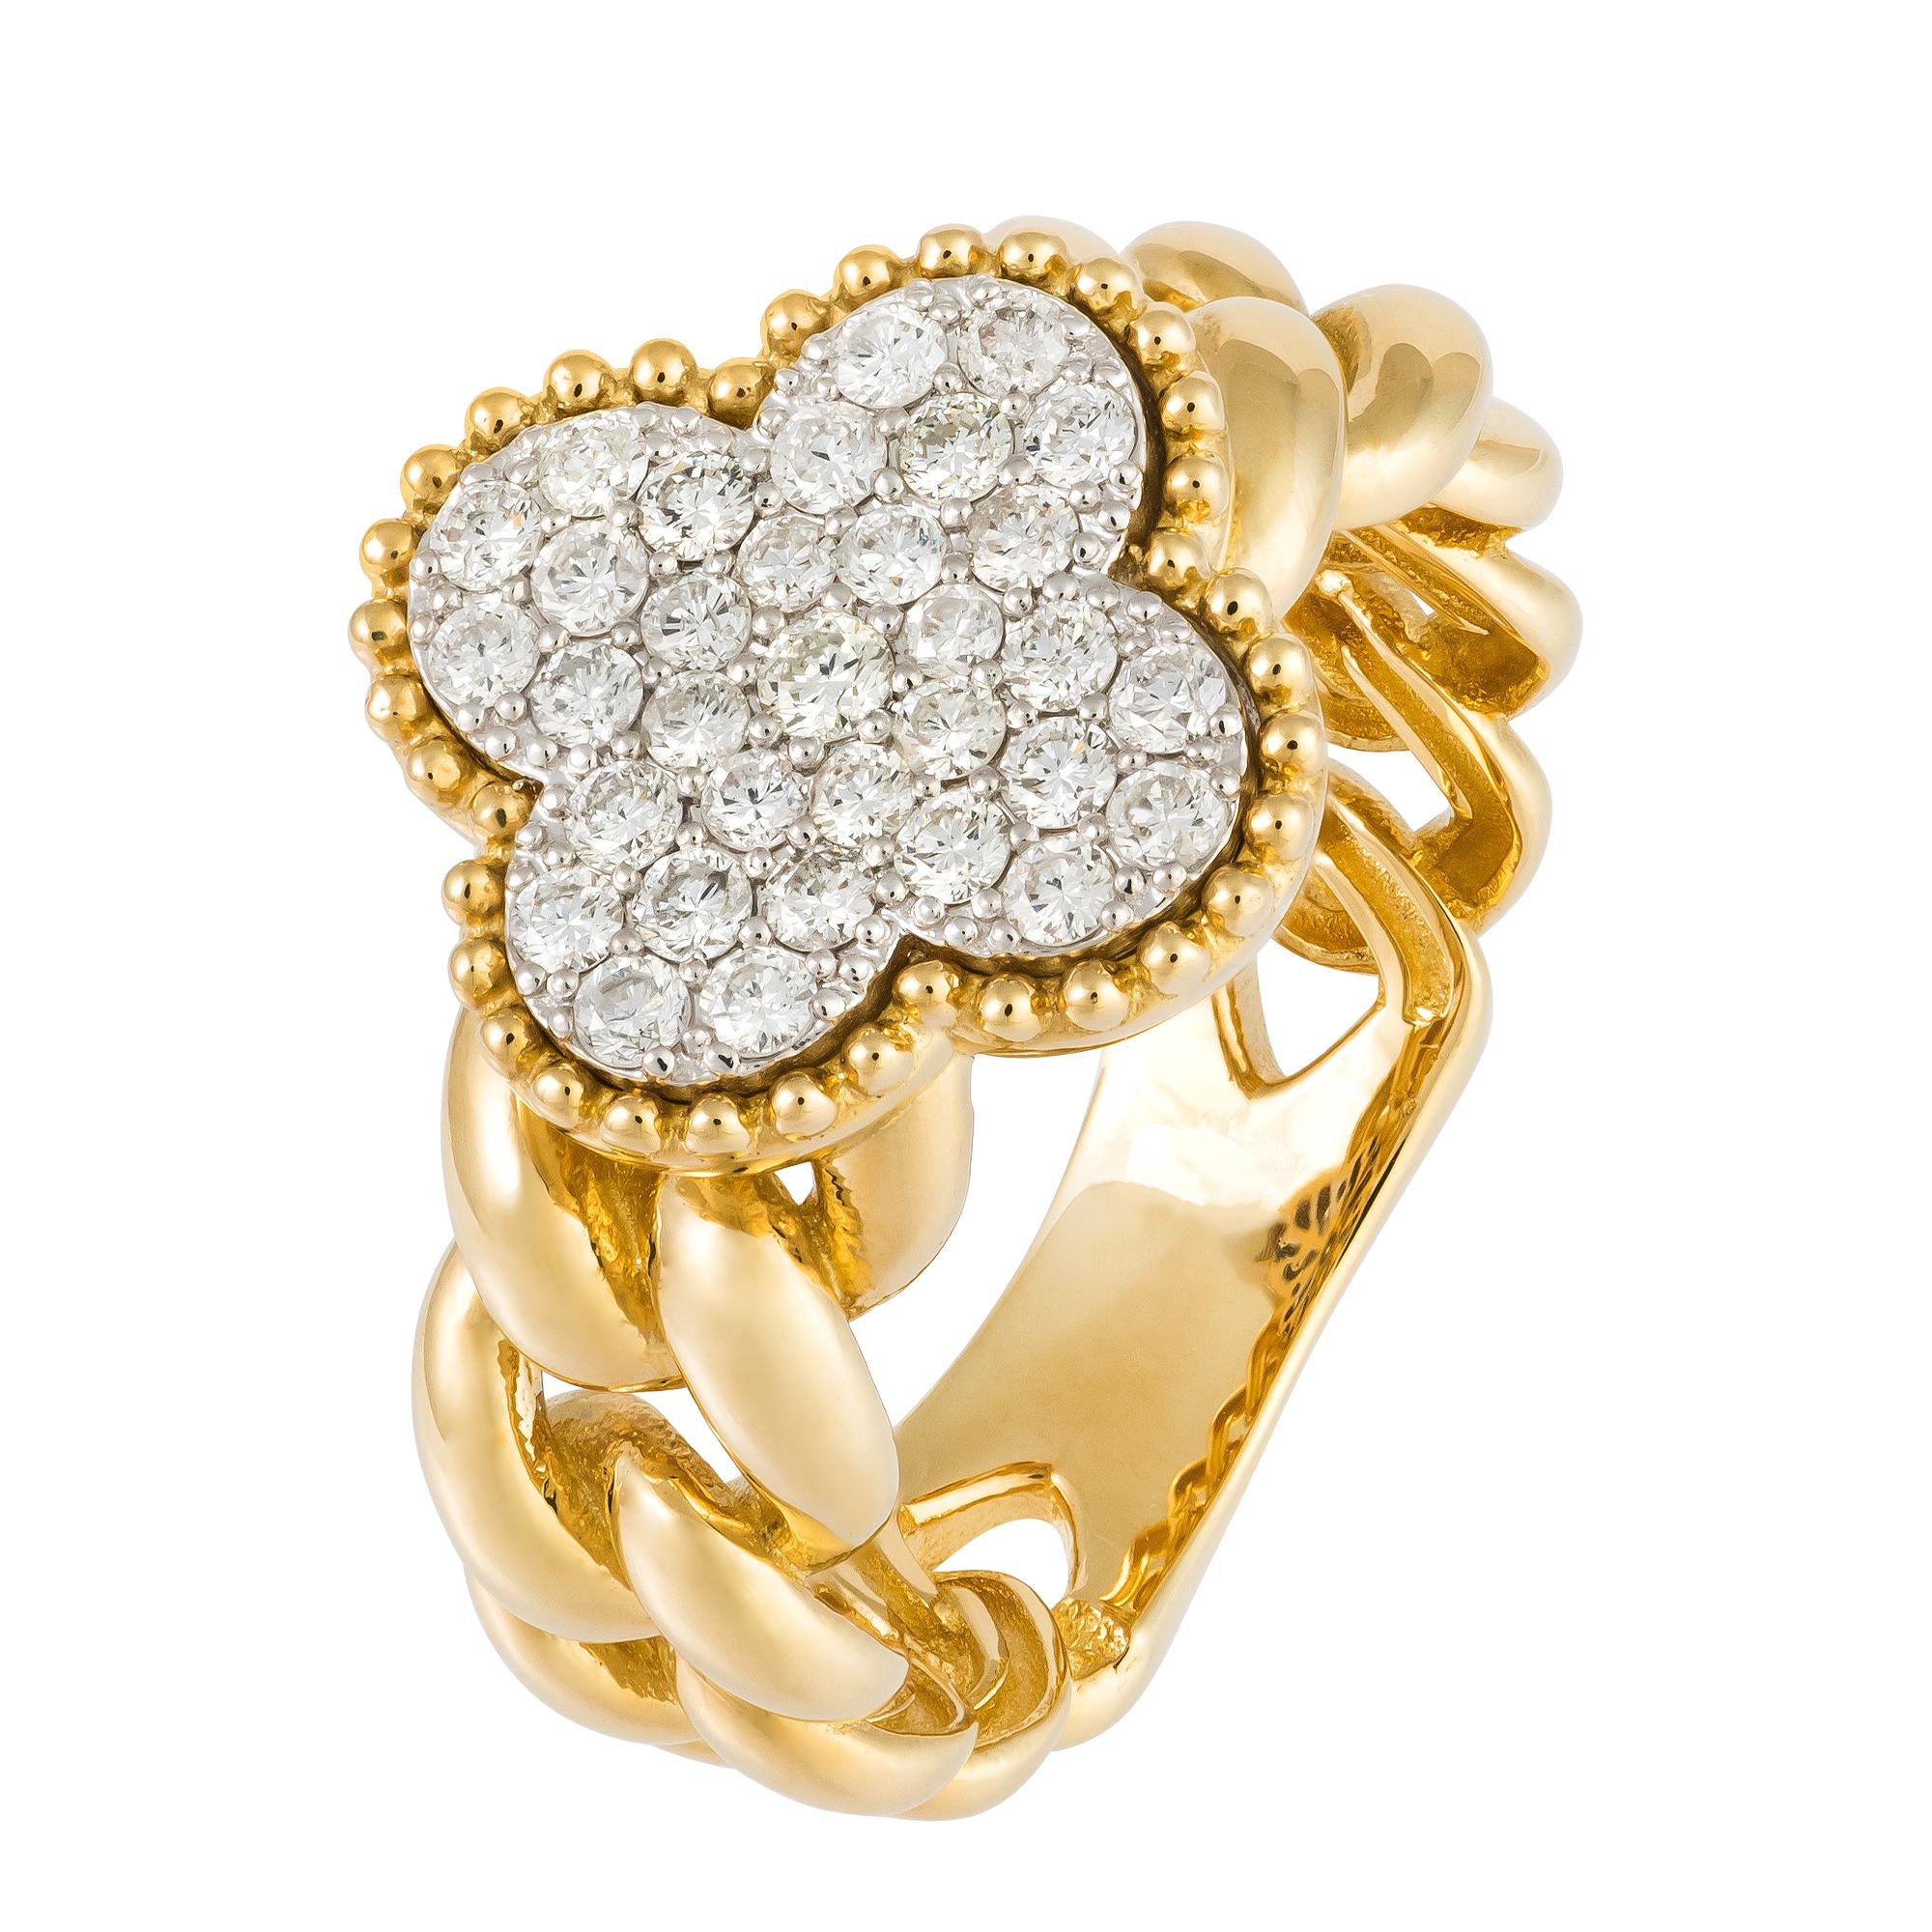 For Sale:  Stunning Yellow 18K Gold White Diamond Ring For Her 2